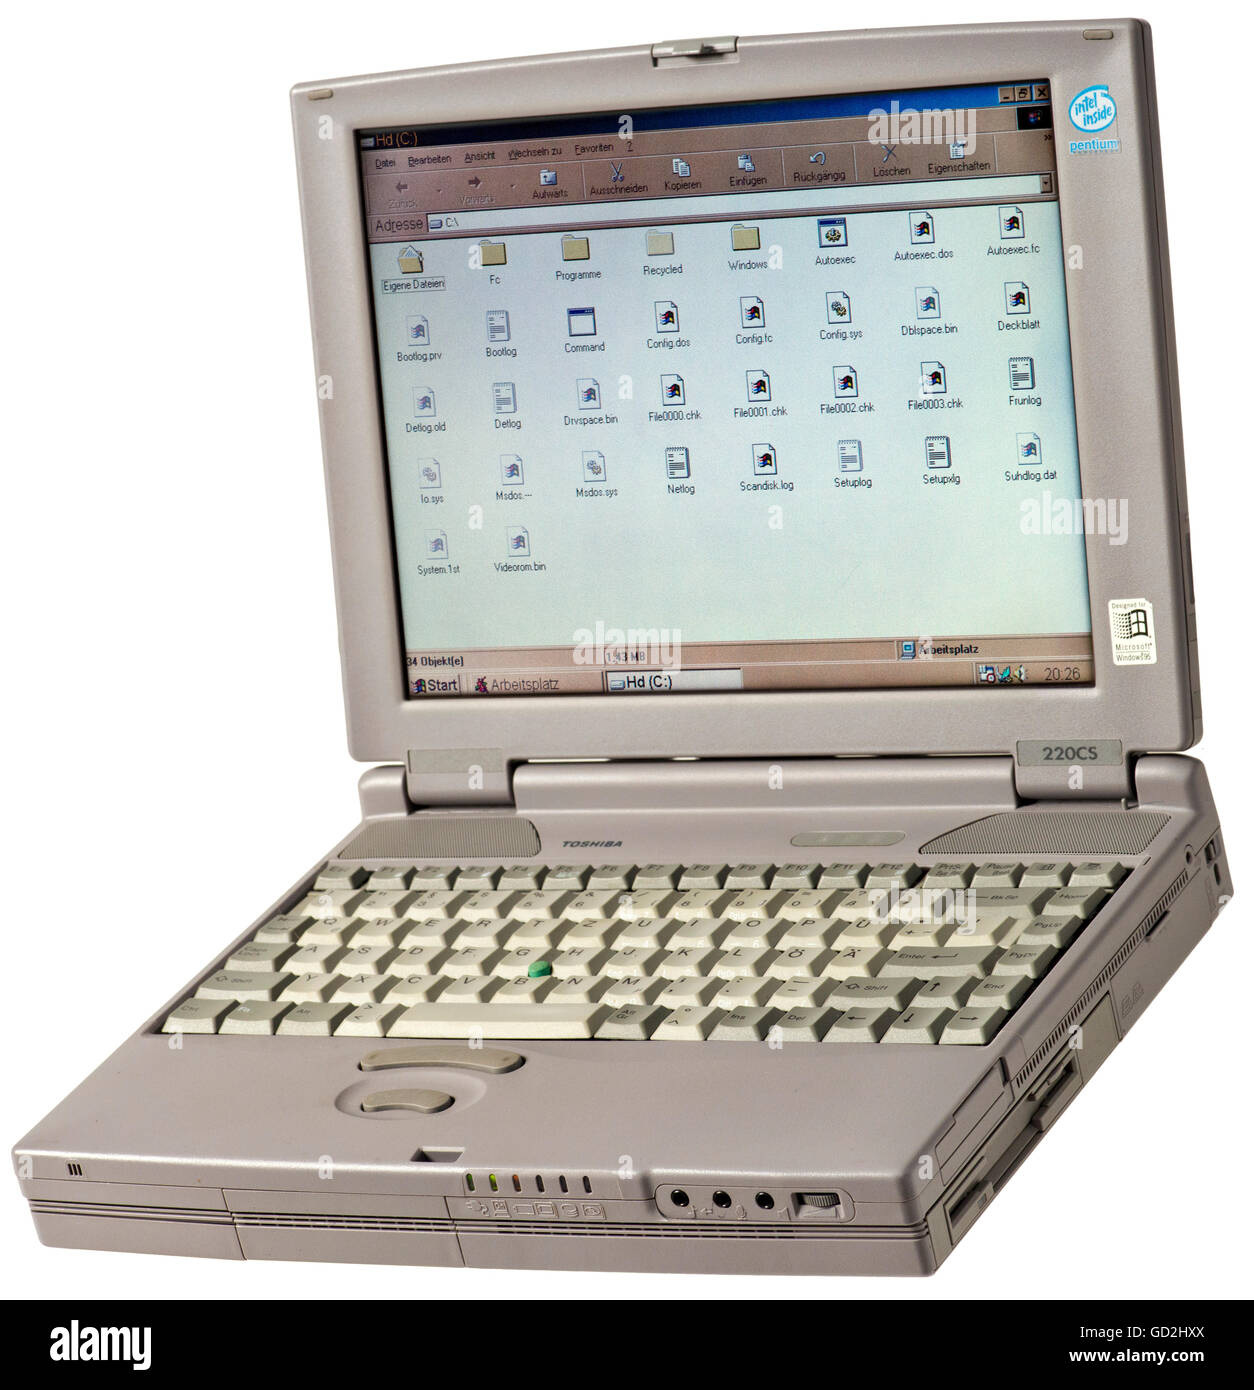 EDP,computer,Toshiba satellite 220CS notebook,133 megahertz Pentium Processor,16 MB EDO RAM,extensible up to 144 megabyte,floppy disk drive,hard disk drive,35 Great Britain,USB connection,computer,switched on,original delivered with Windows 95,upgraded with Microsoft Windows 98,Japan,1996,laptop computer,laptops,laptop computers,Intel inside,computer engineering,hardware,electronics,history of computer,Japanese,Made in Japan,clipping,cut out,cut-out,cut-outs,1990s,90s,old,electronic data processing,information technology,Chief,Additional-Rights-Clearences-Not Available Stock Photo